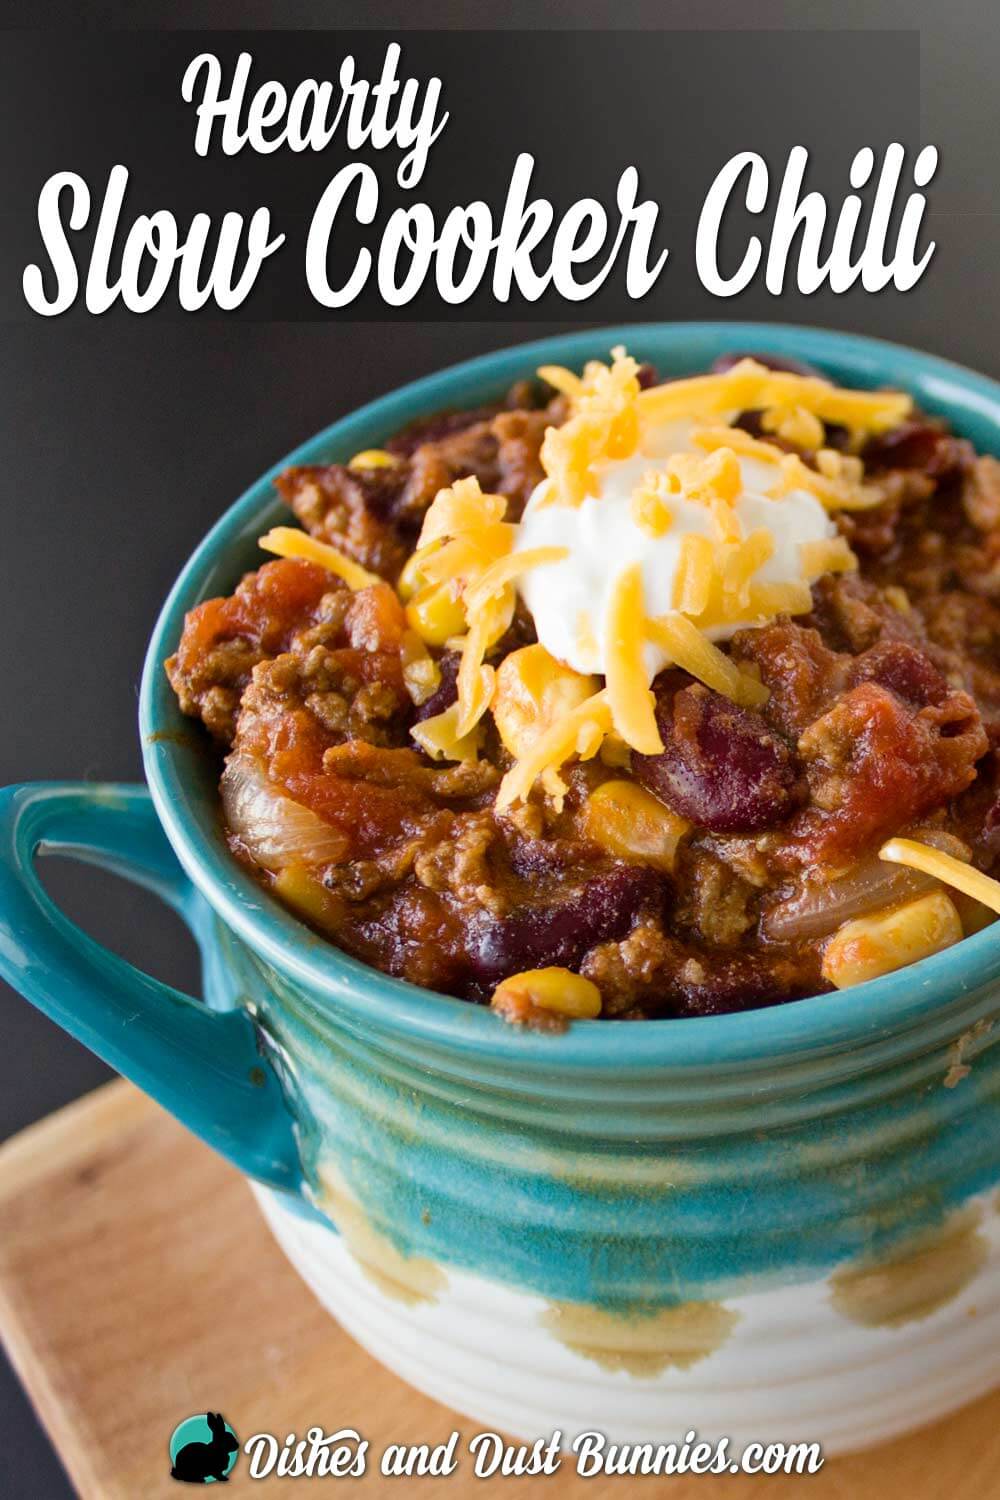 Hearty Slow Cooker Chili - Dishes & Dust Bunnies